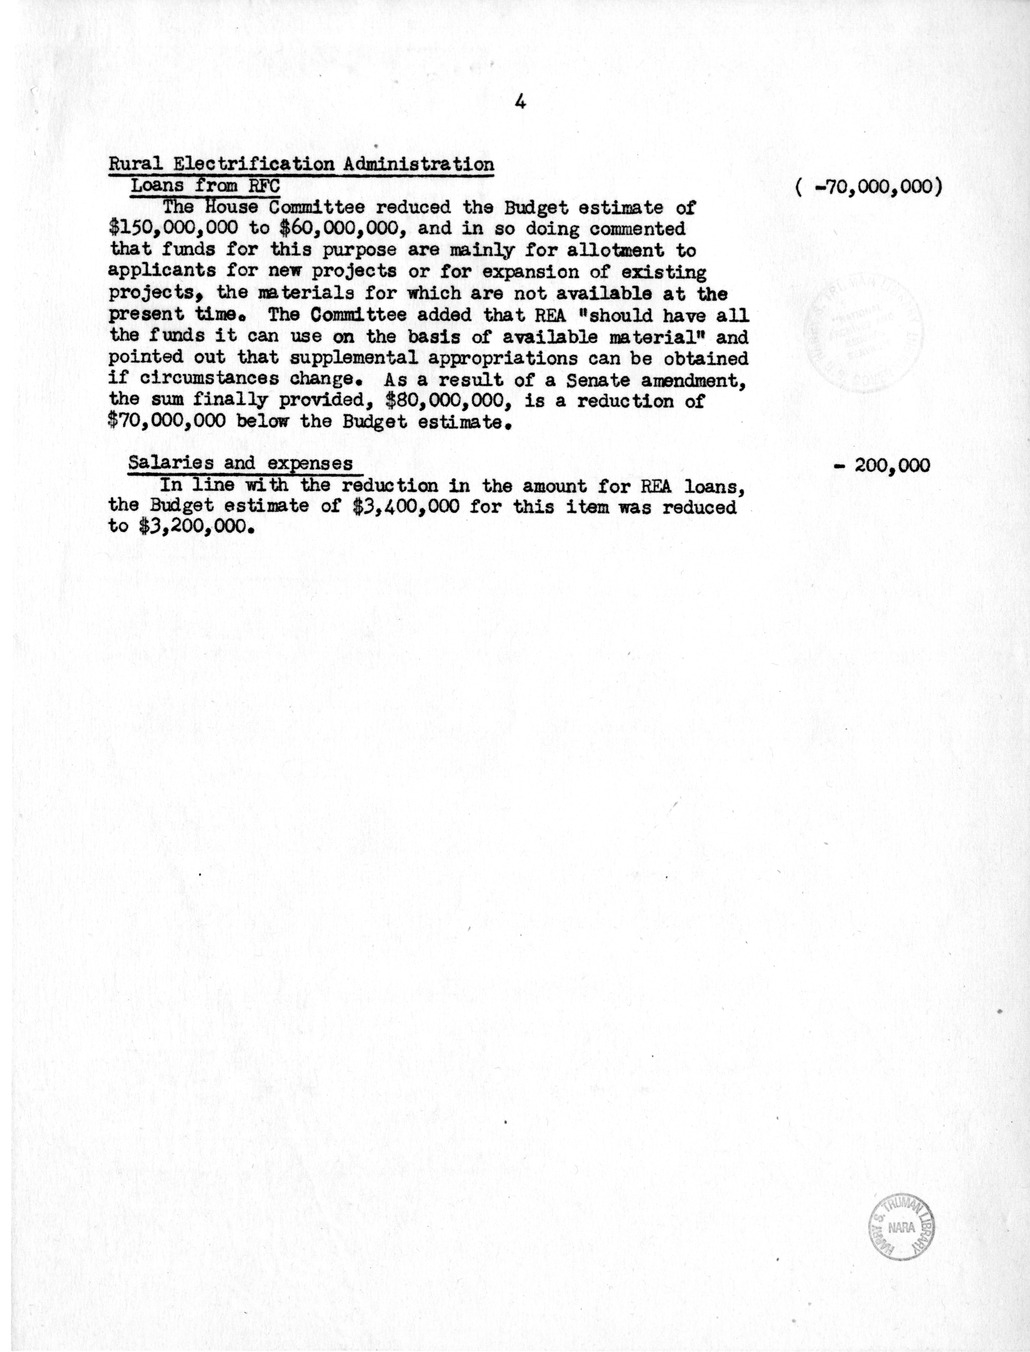 Memorandum from Harold D. Smith to M. C. Latta, H.R. 2689, Making Appropriations for the Department of Agriculture, with Attachments